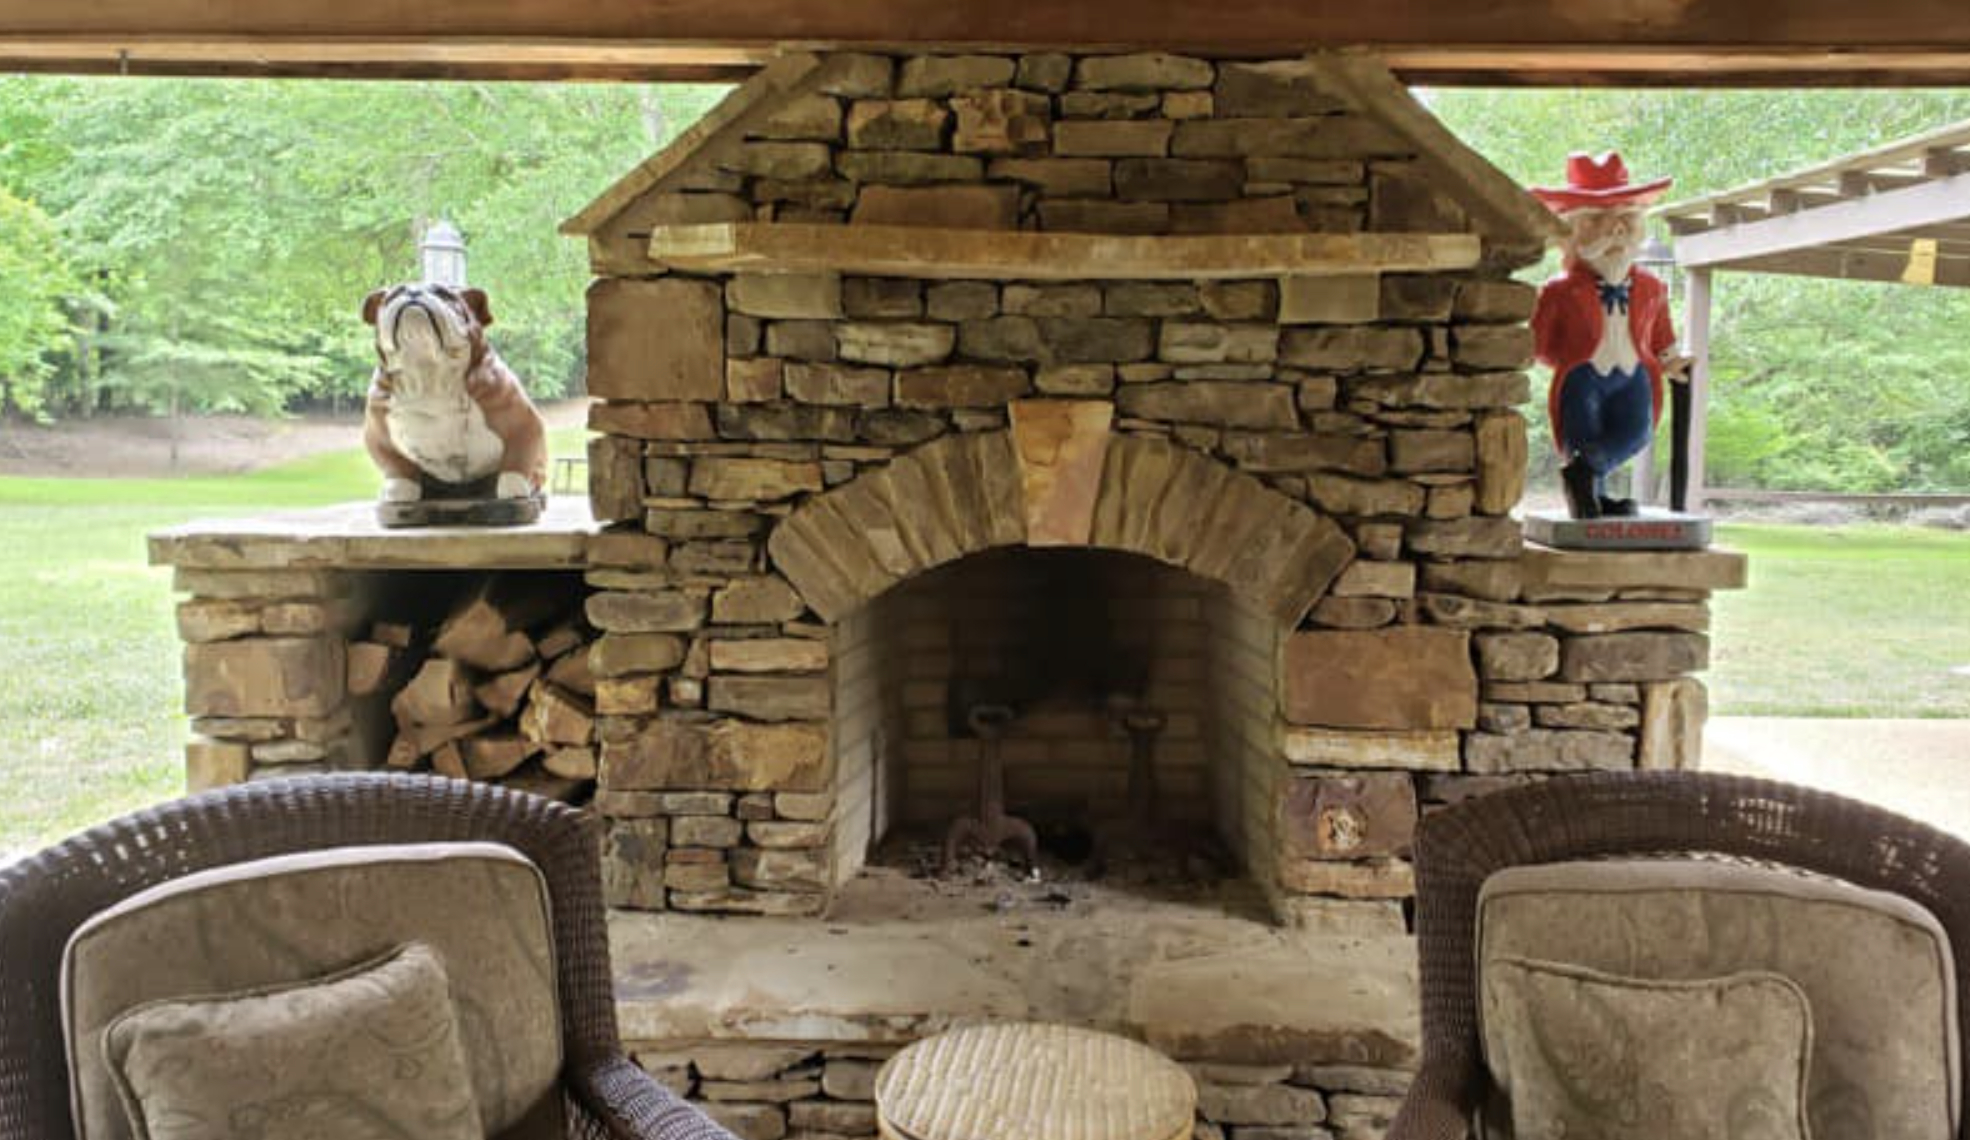 this image shows fireplace in Laguna Niguel, California